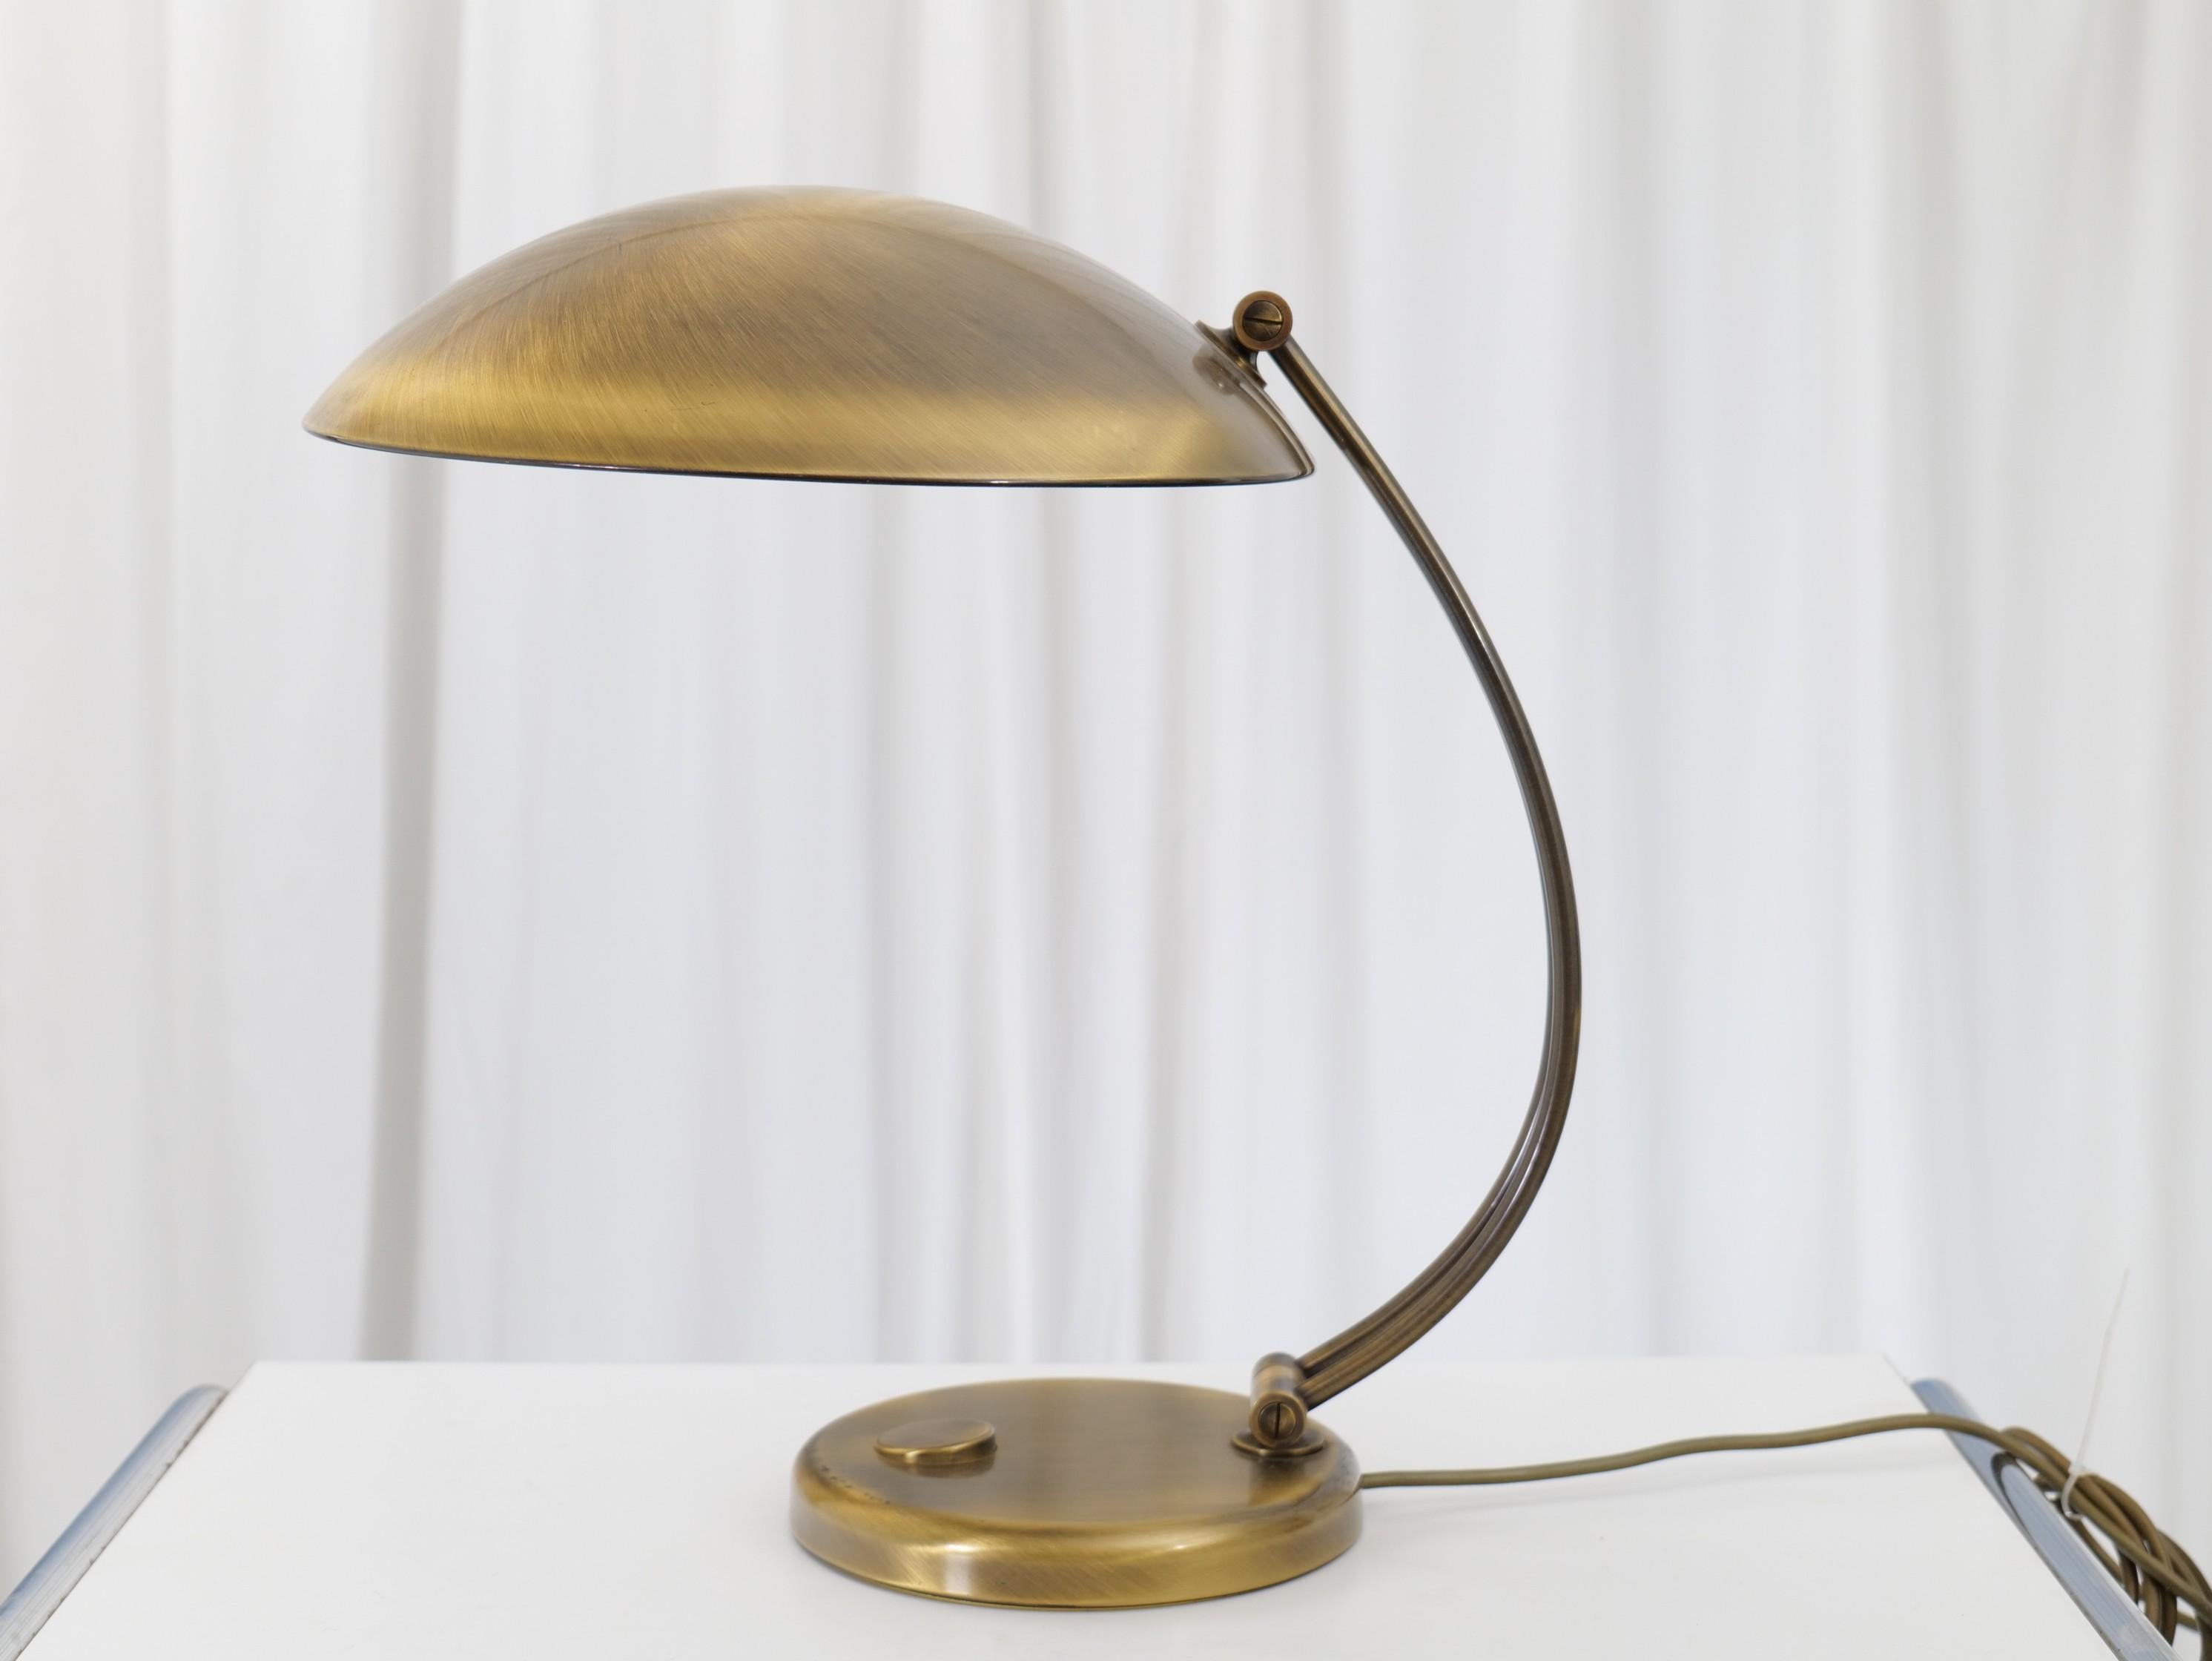 Very rare midcentury brass lamp from Hillebrand. Brushed brass and two tilt joints.

Made in Germany 1950's-1960's.

Dimensions:
50 cm height
44 cm depth
30 cm width
up to 250 V
EU plug, E27 socket.